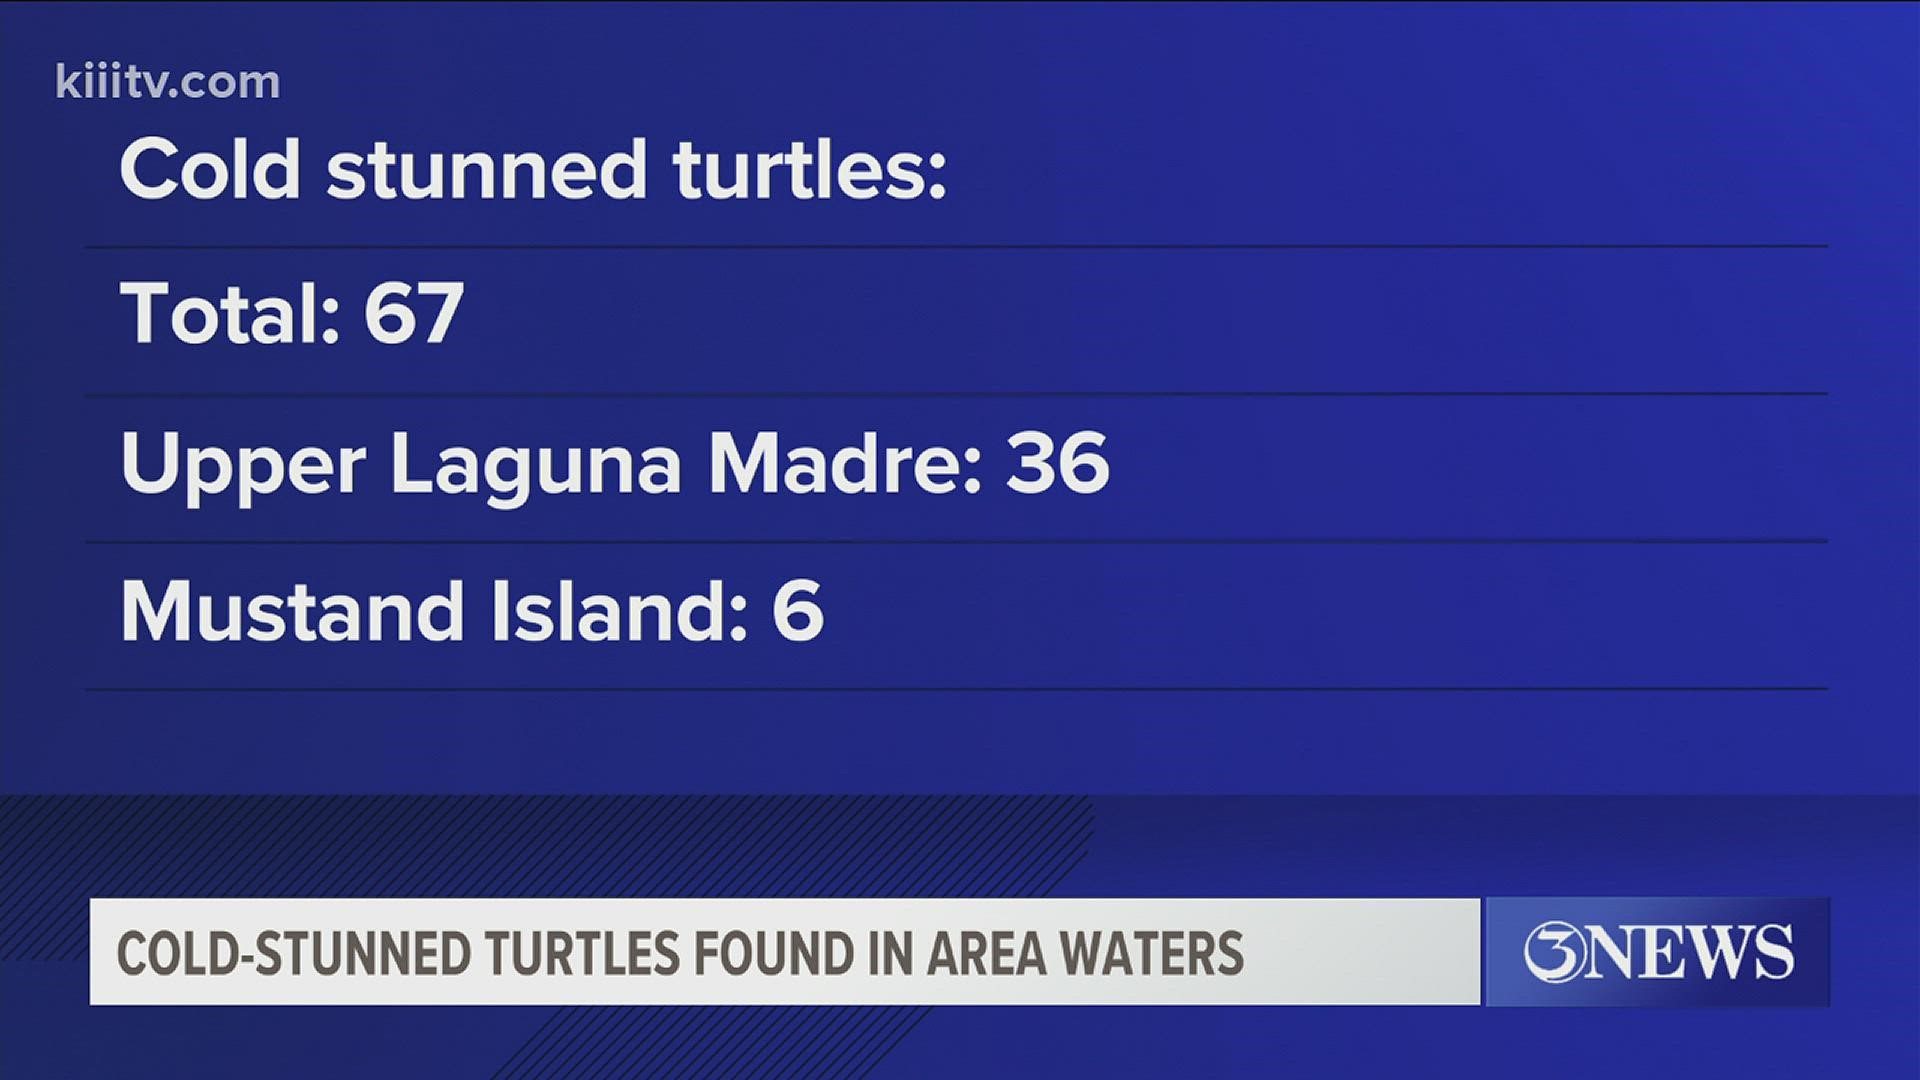 With water temperatures falling below 50-degrees, turtles can get slow, sluggish, and even stunned. More are washing up on Texas shores.